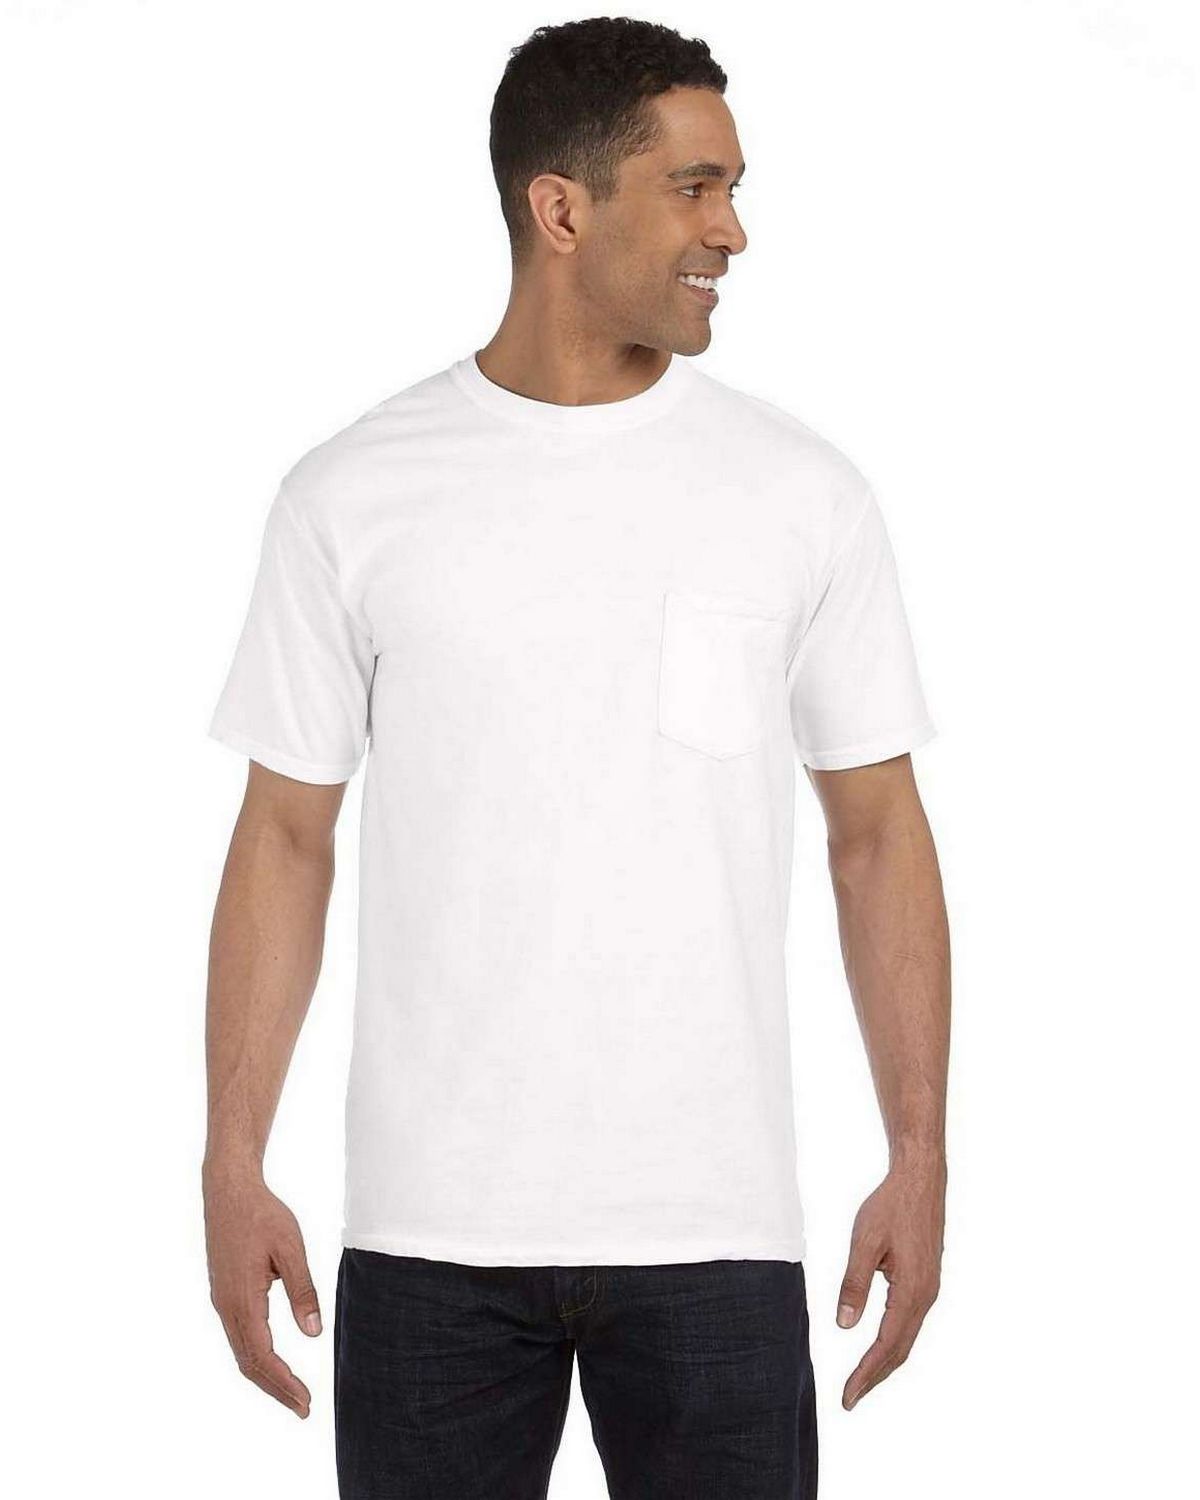 russell t shirts with pocket